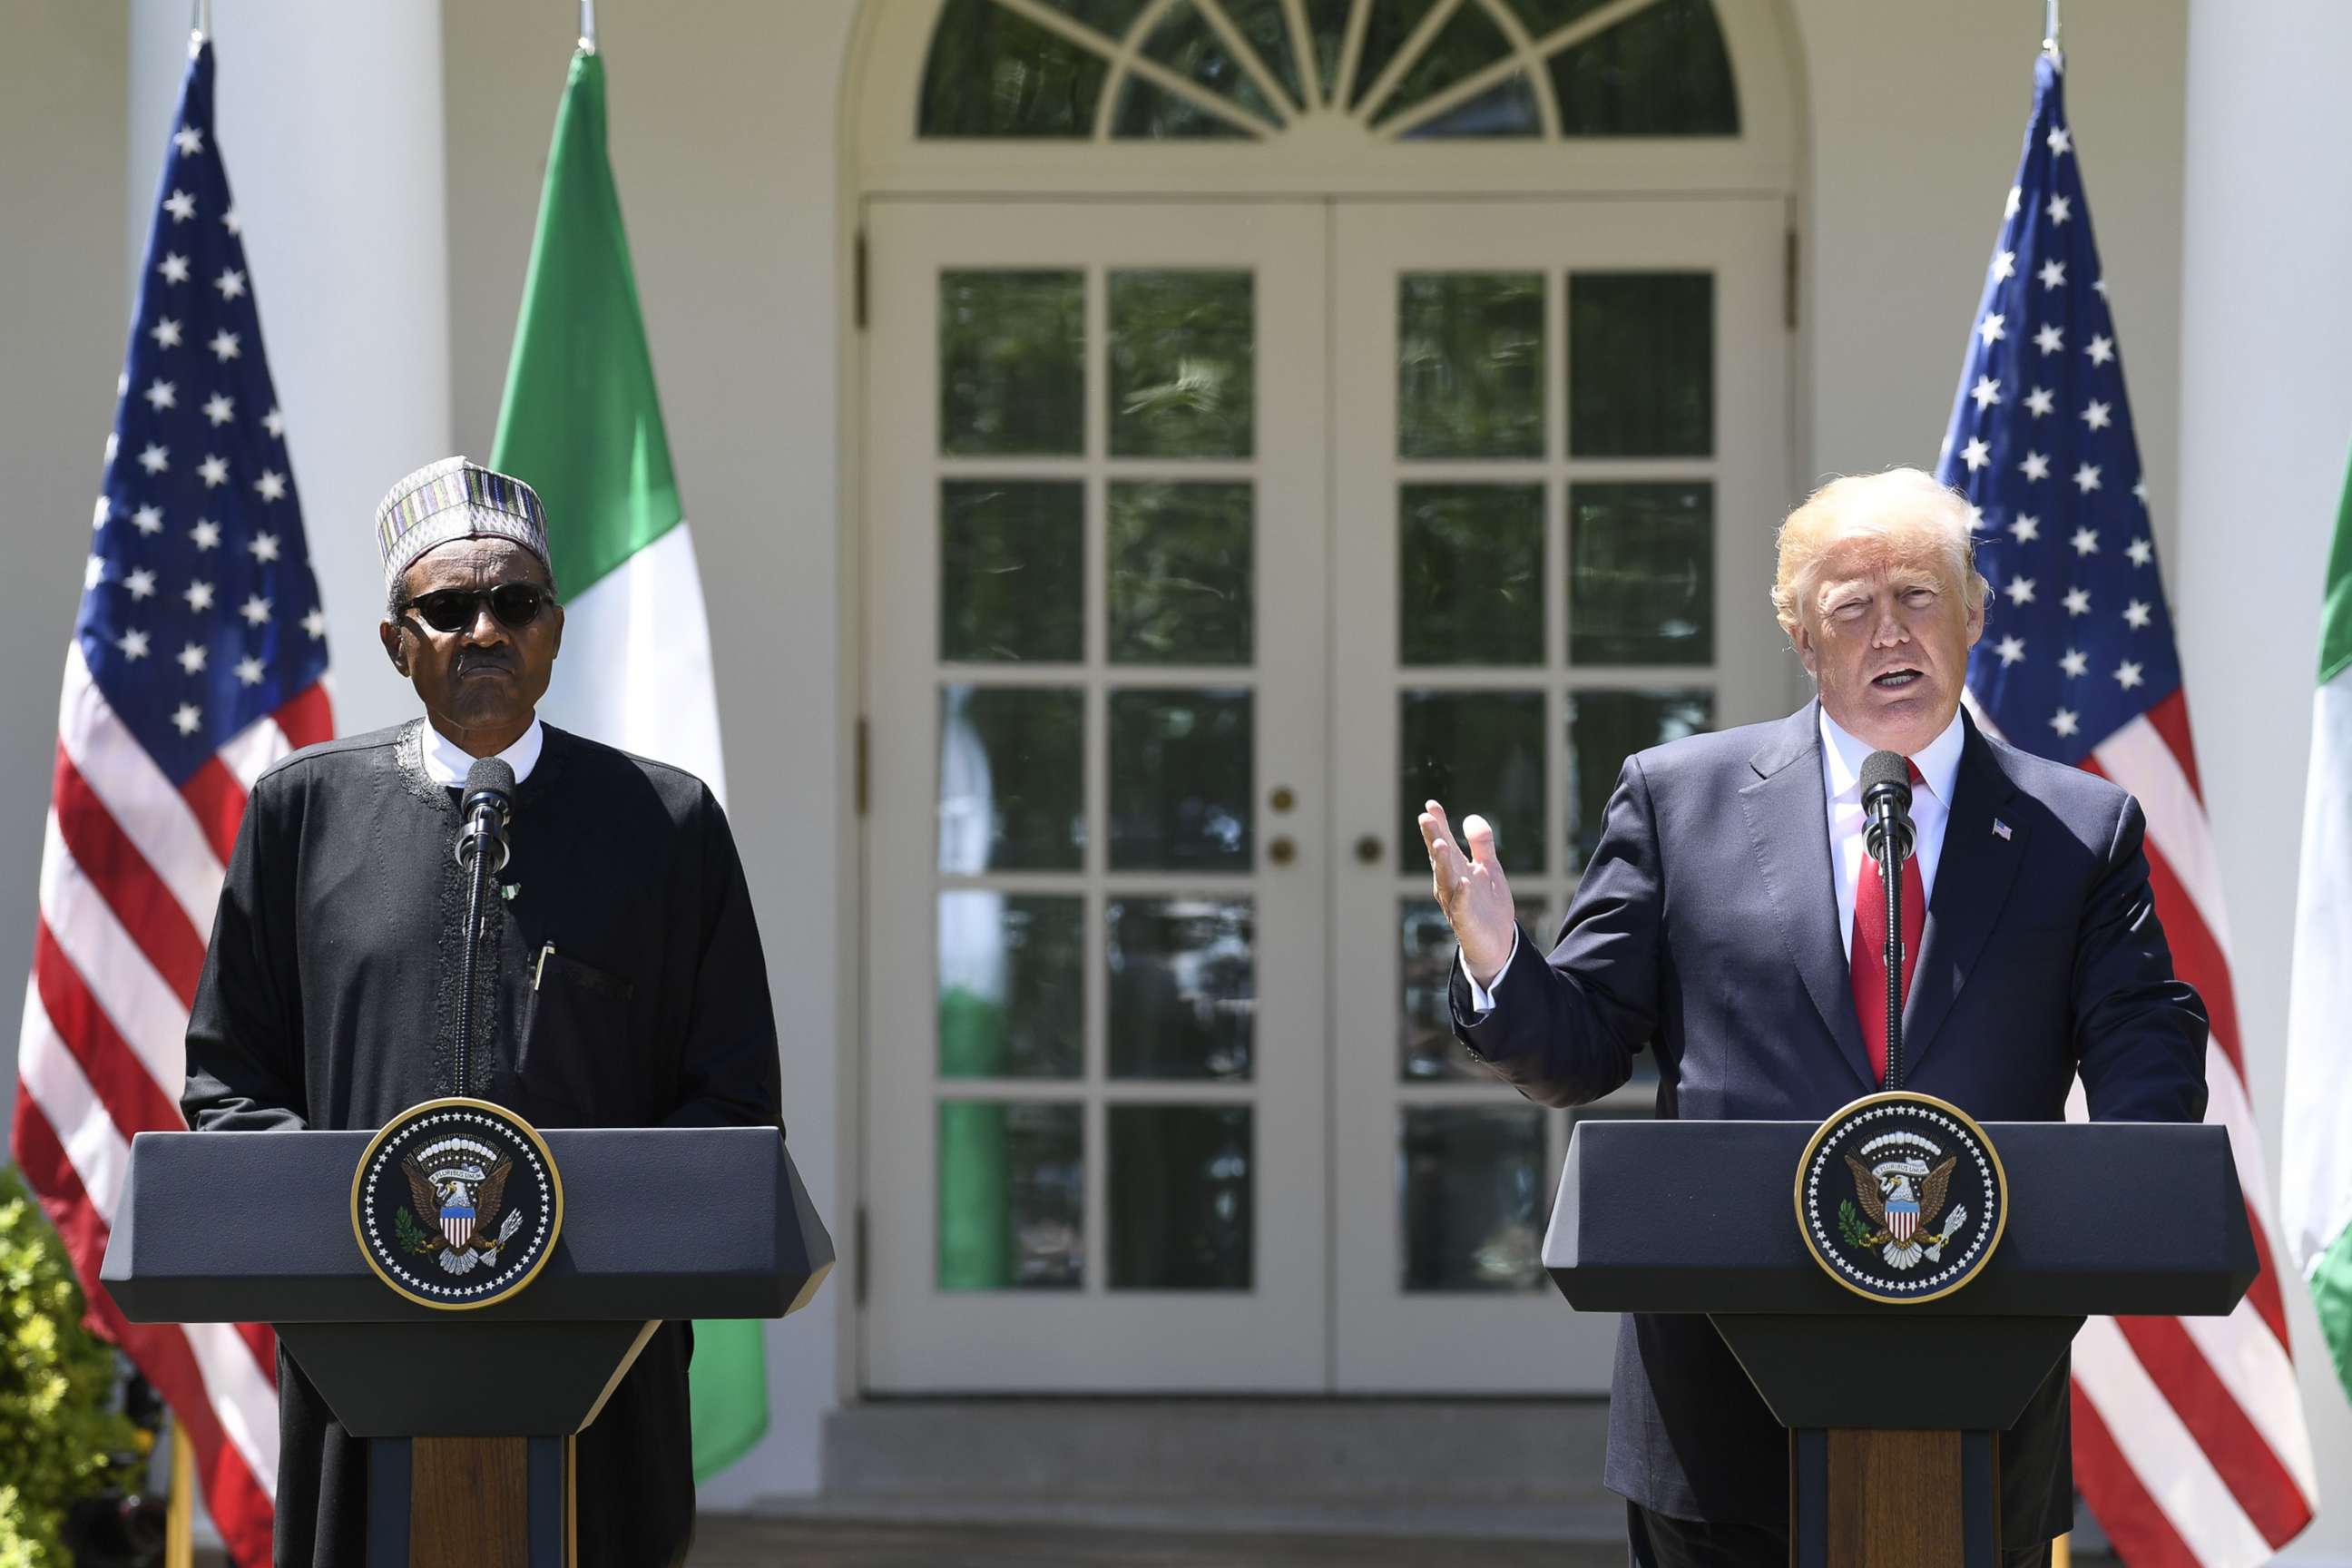 PHOTO: Nigeria's President Muhammadu Buhari and President Donald Trump hold a joint press conference in the Rose Garden at the White House in Washington, April 30, 2018.